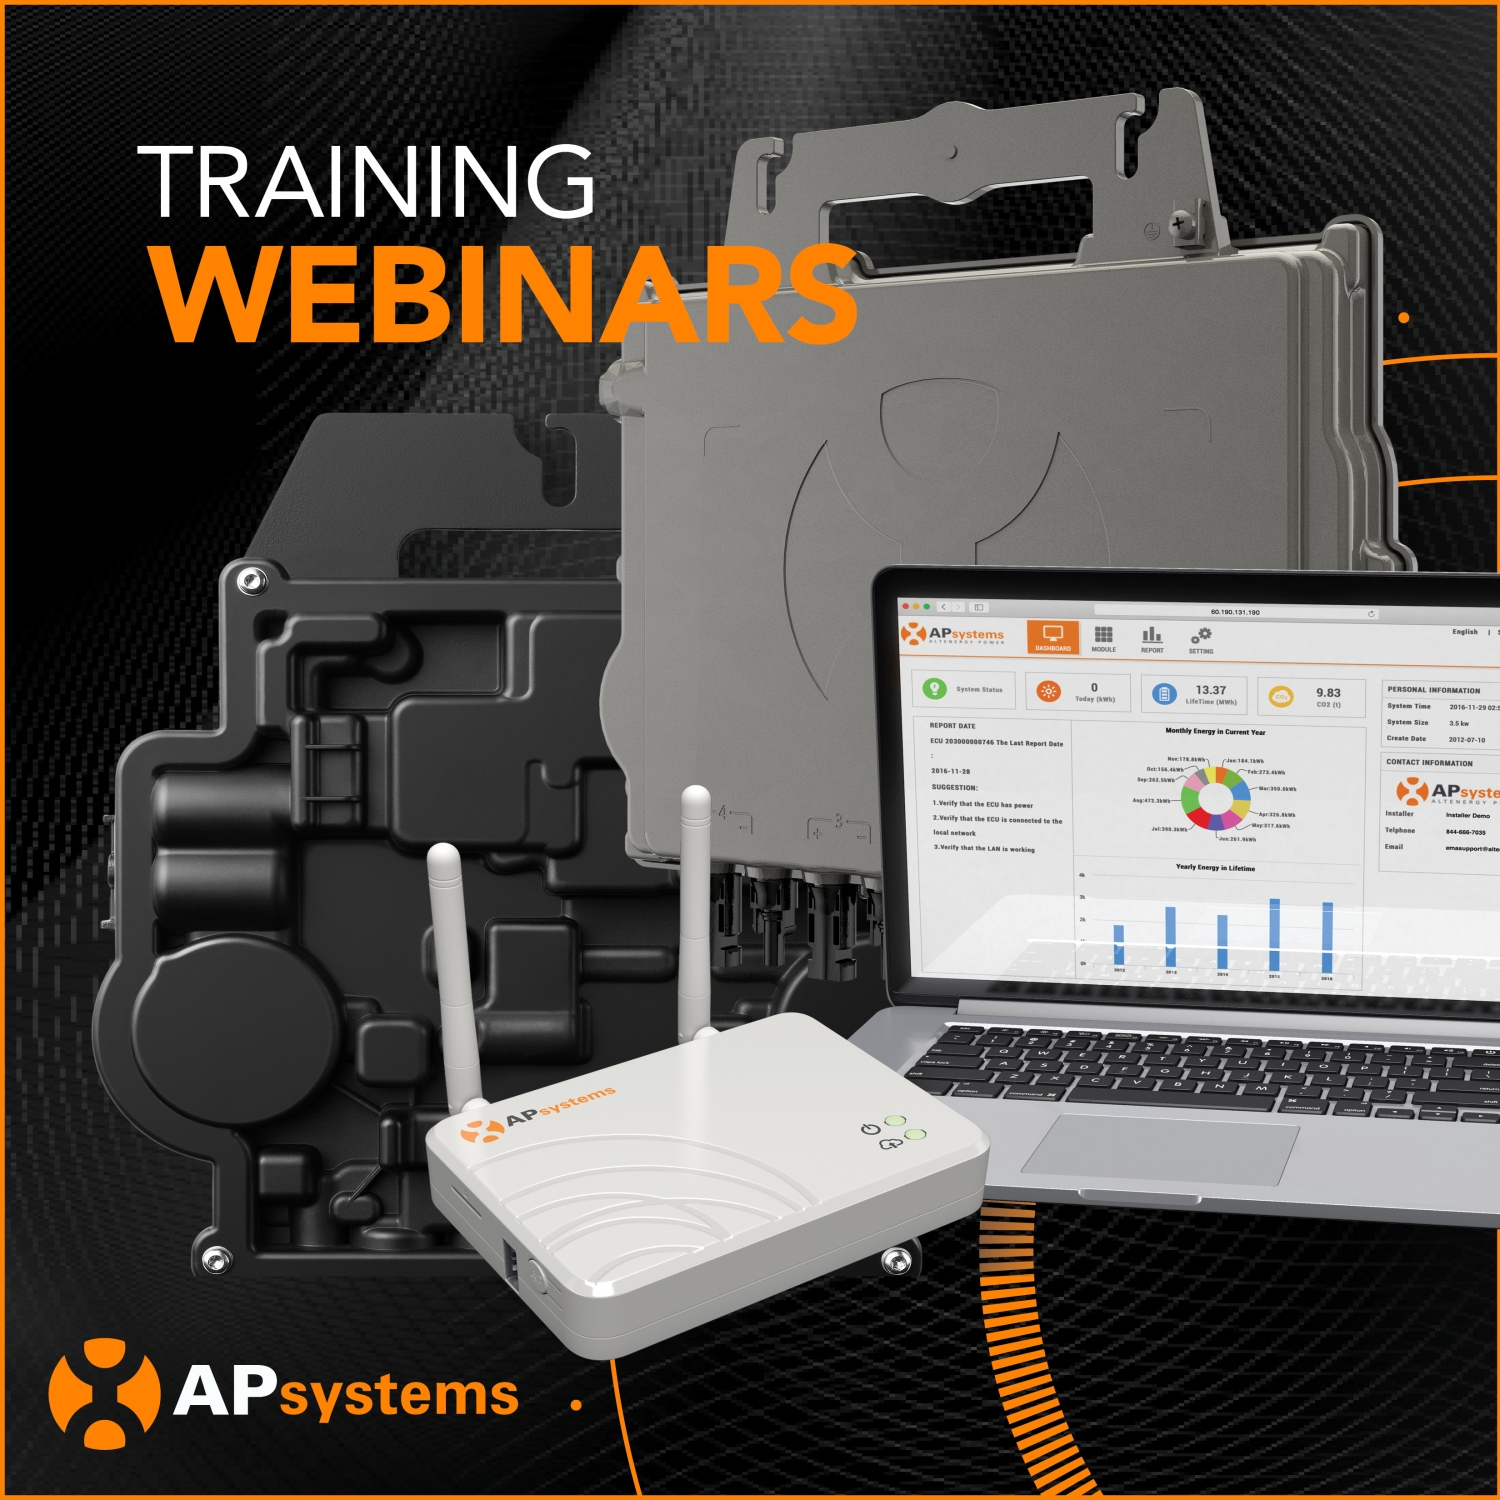 leader technology | multi-platform APsystems in global Solar USA for Training Free - Webinars MLPE Installers Professional The